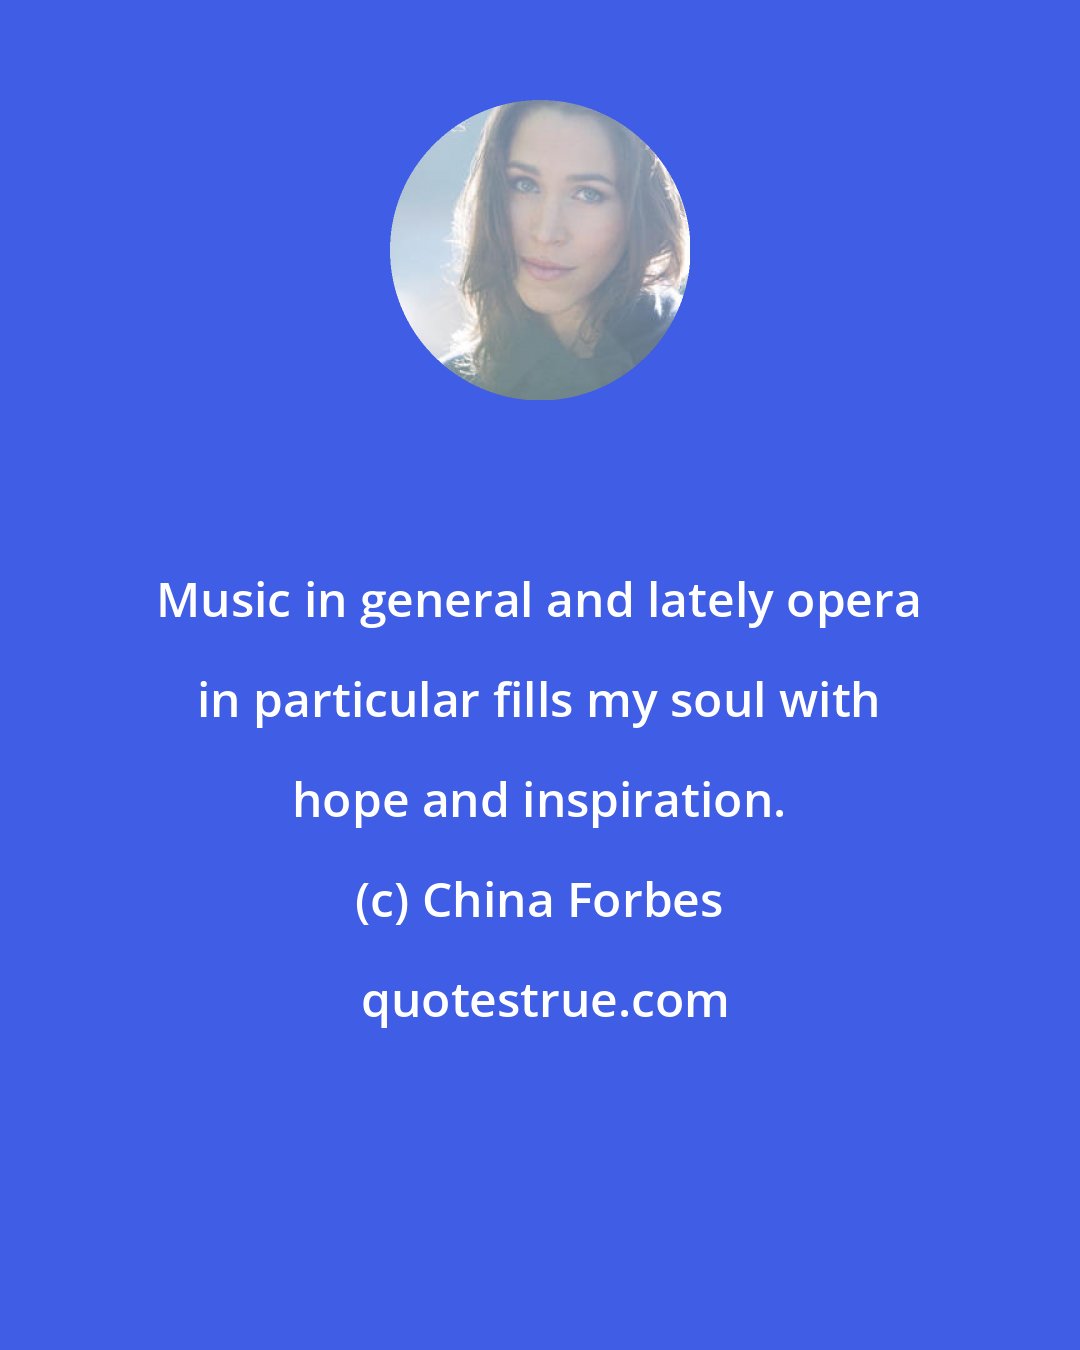 China Forbes: Music in general and lately opera in particular fills my soul with hope and inspiration.